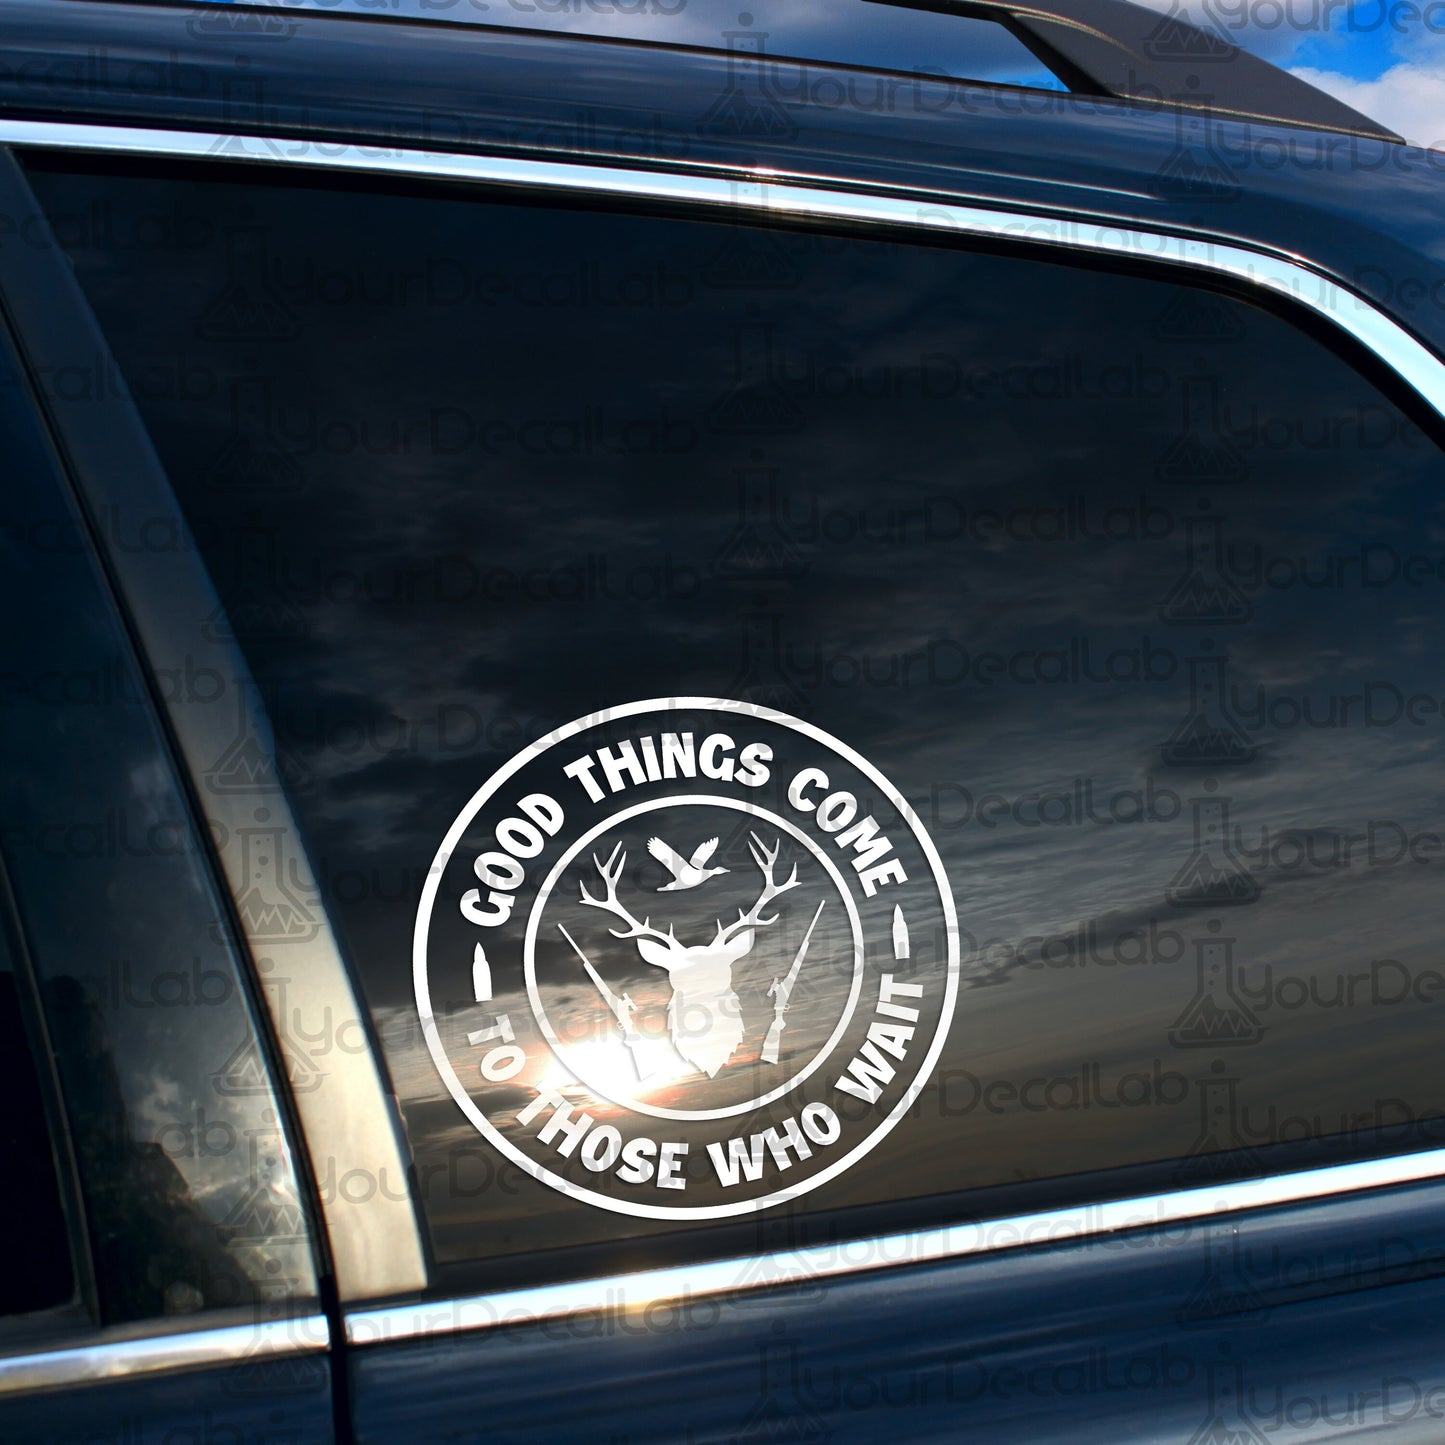 a sticker on the side of a car that says good things come to those